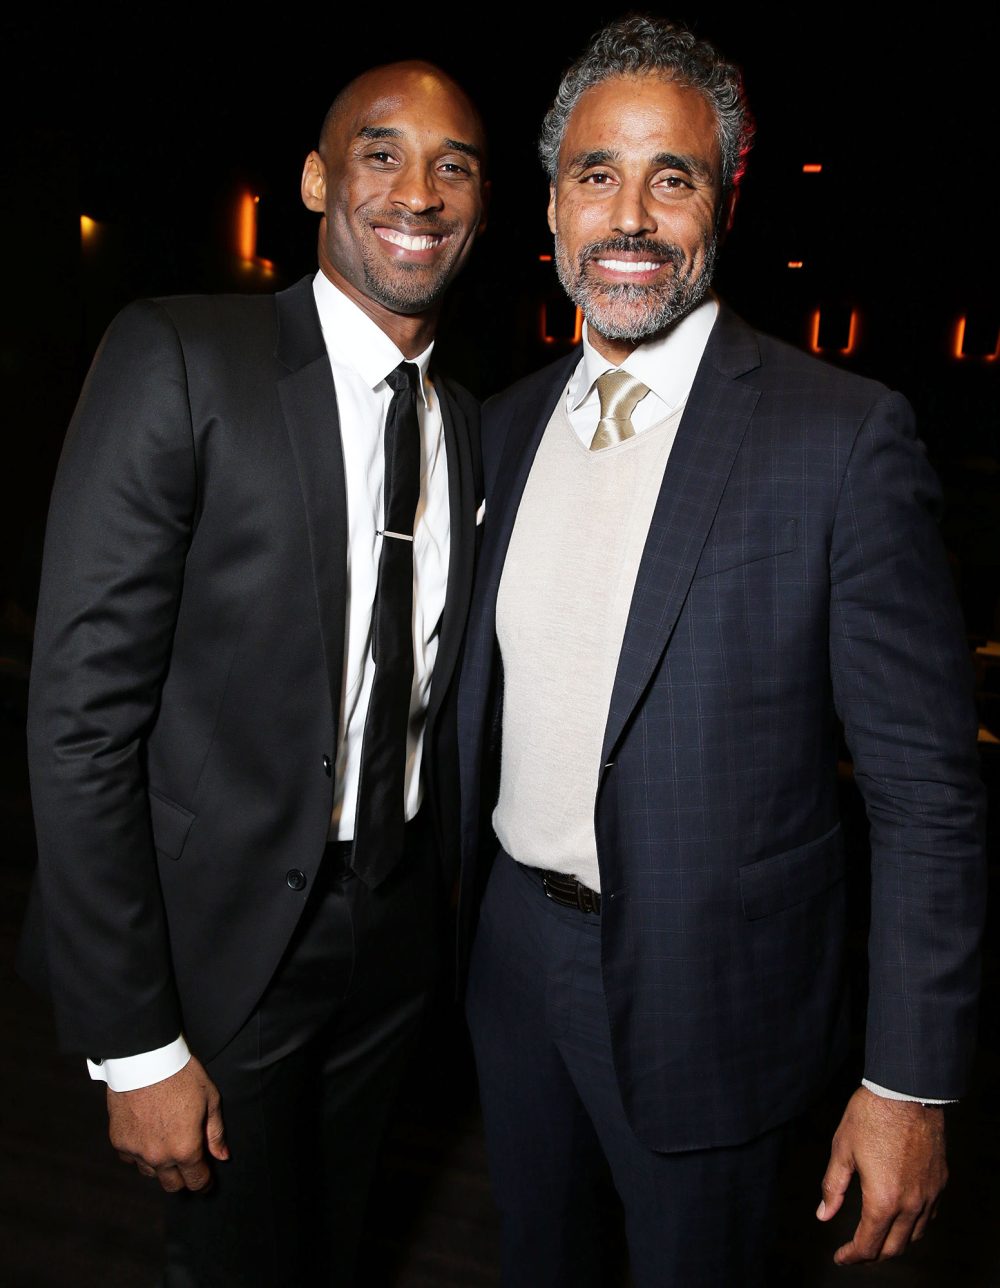 Rick Fox Speaks Out After False Reports That He Died in Helicopter Crash With Kobe Bryant